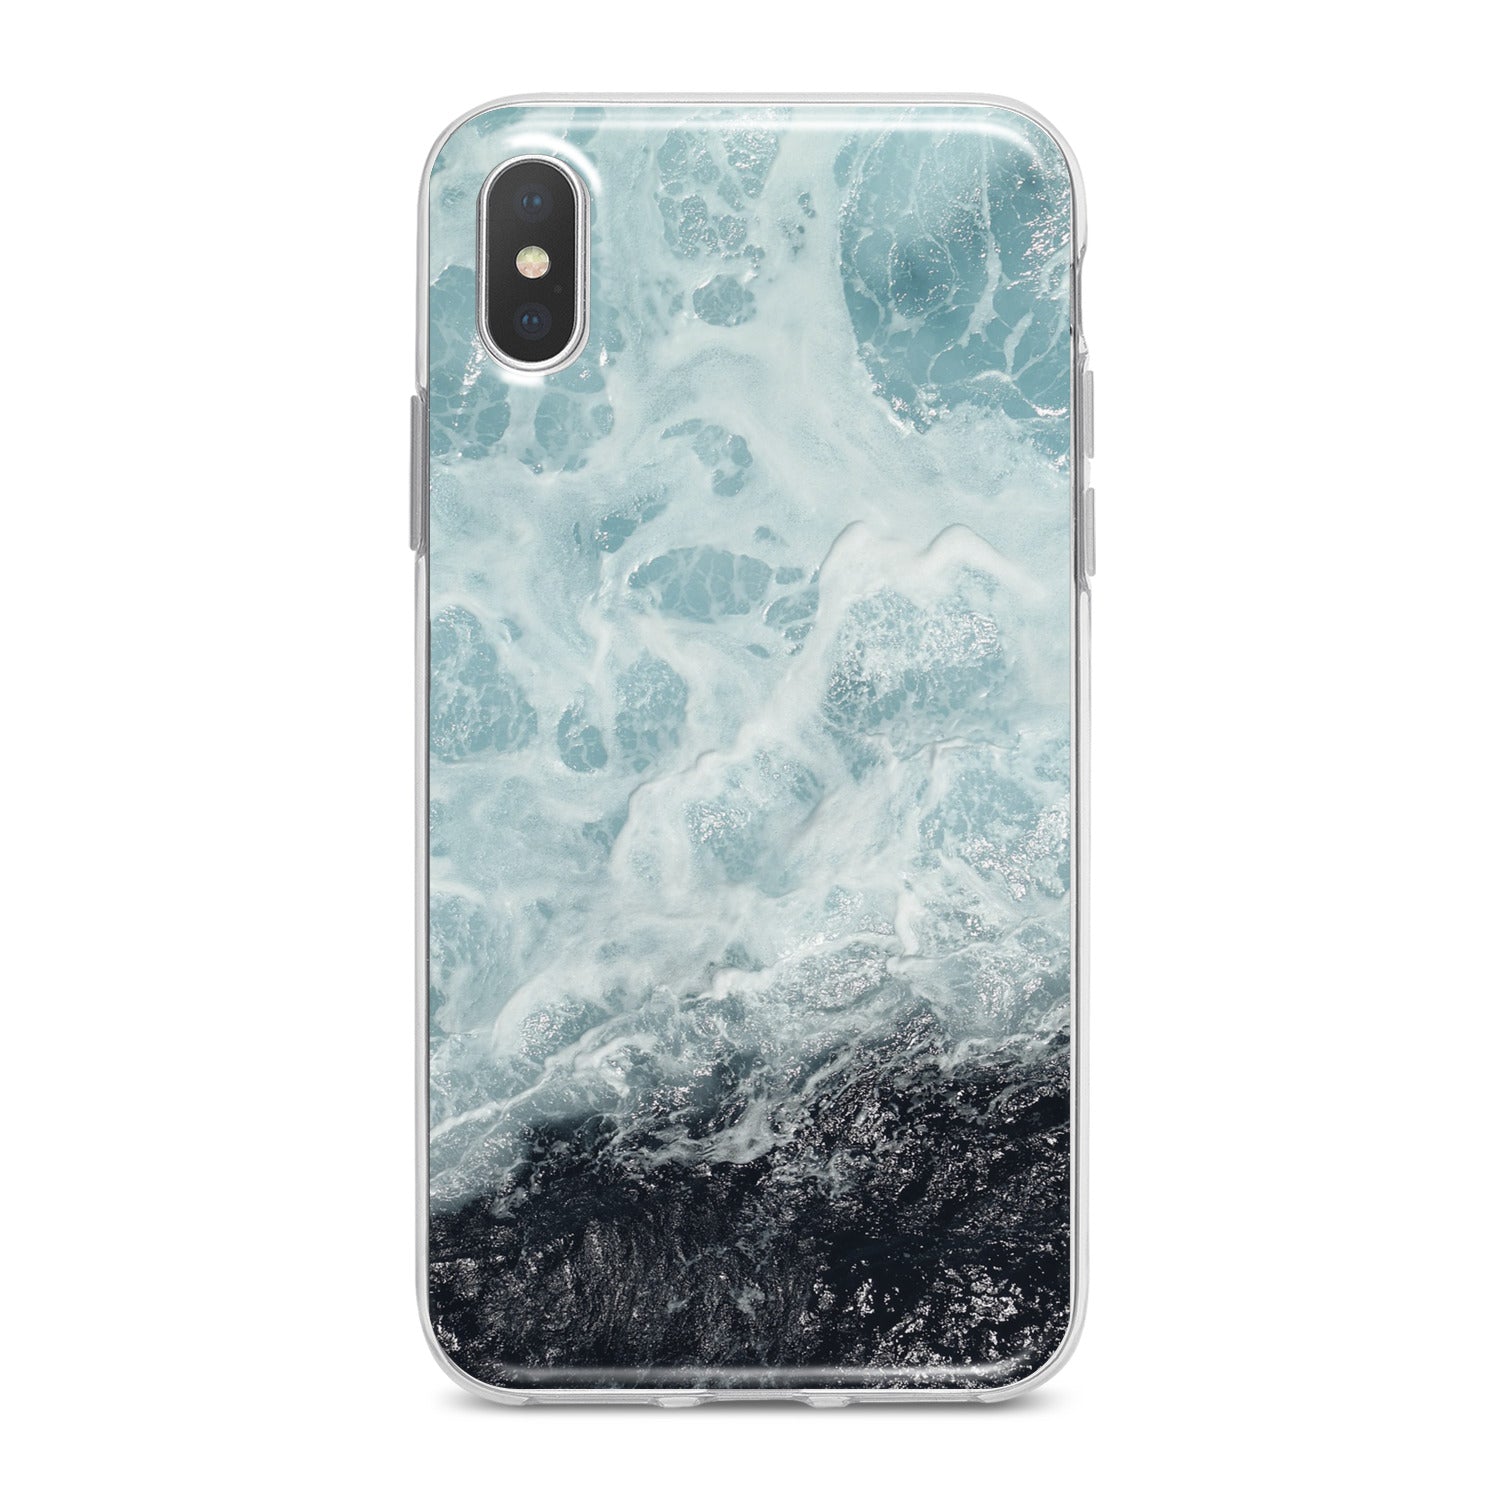 Lex Altern Sea Foam Phone Case for your iPhone & Android phone.